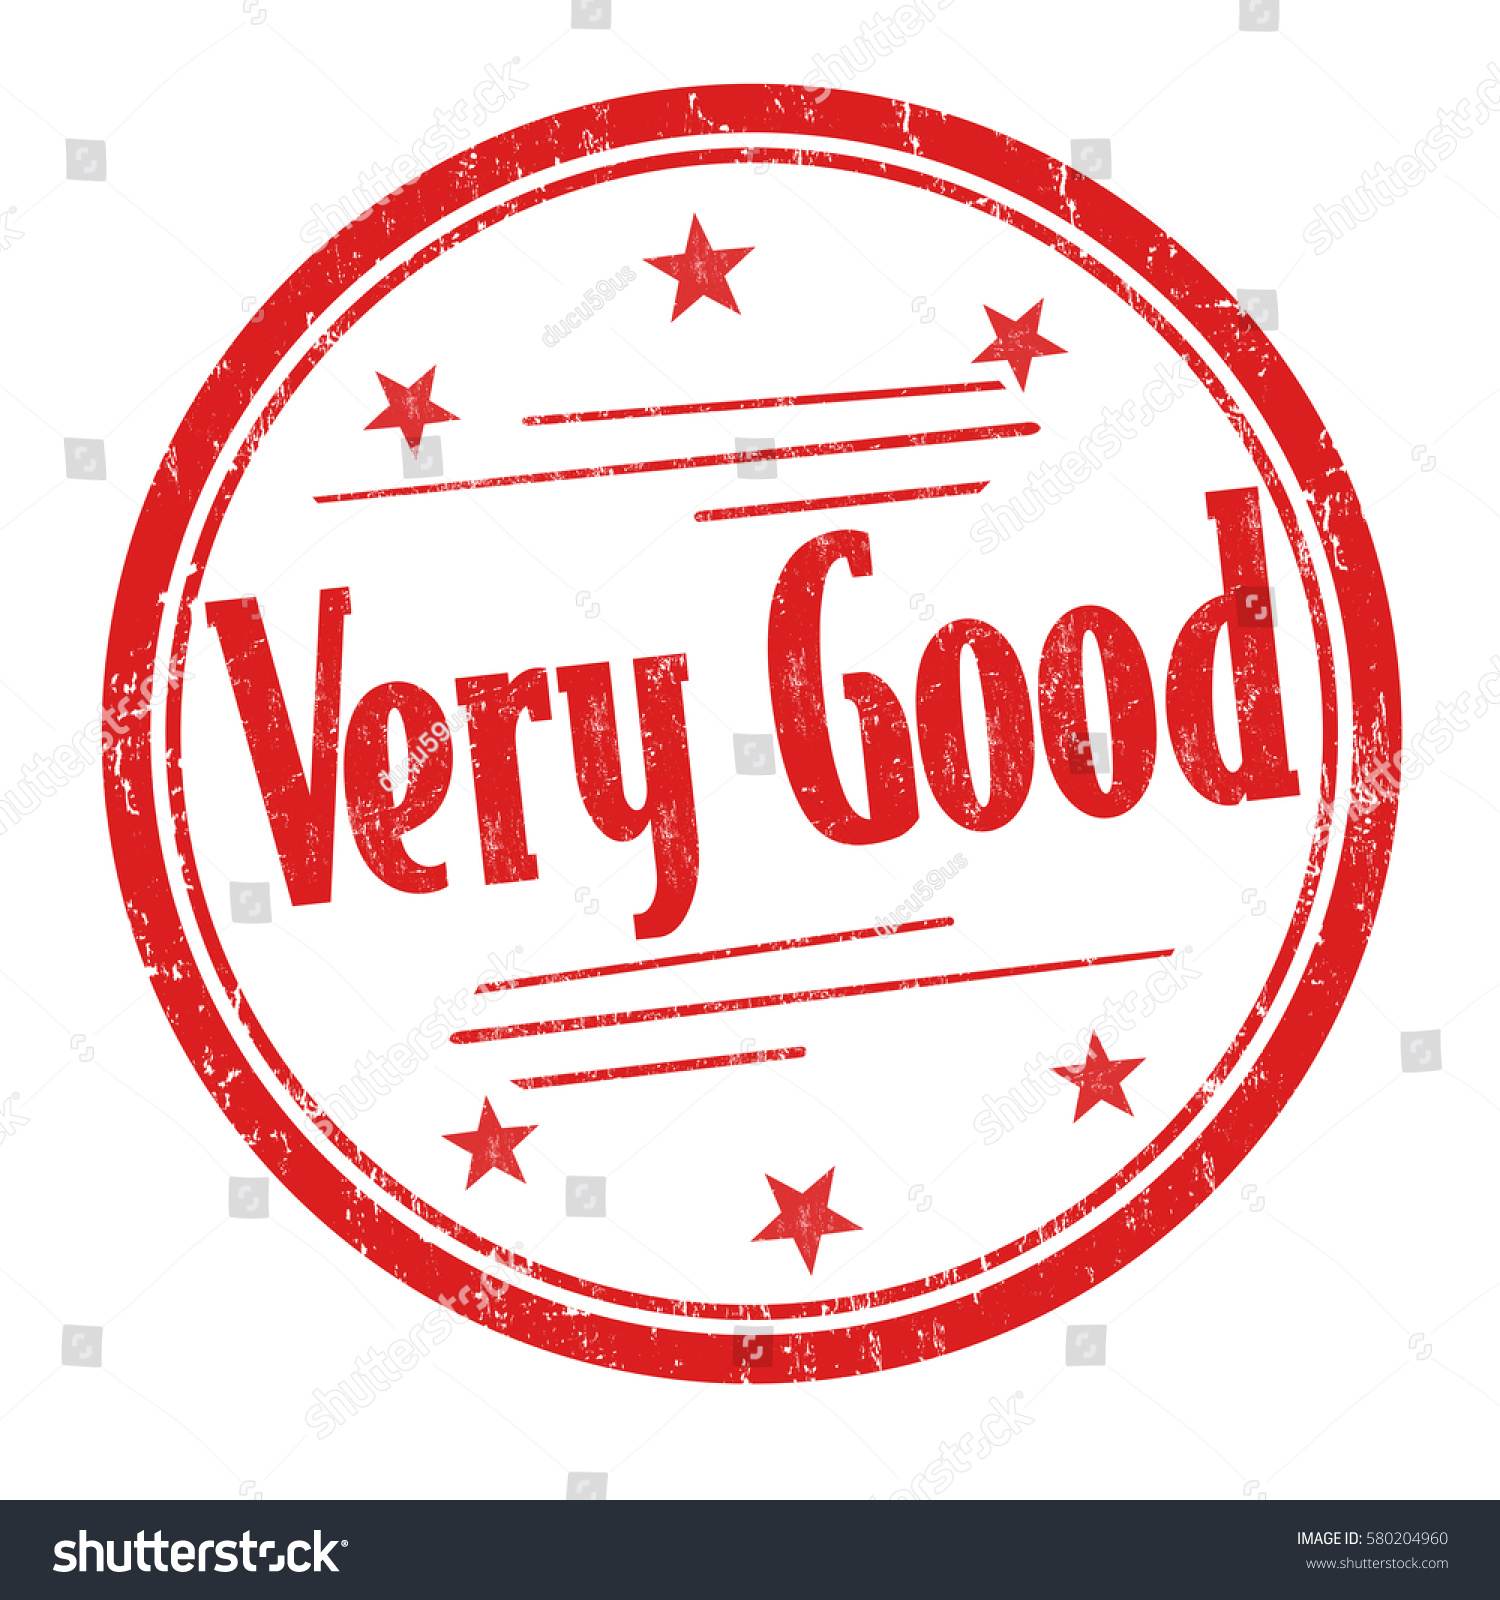 Very Good Grunge Office Rubber Stamp Stock Vector Royalty Free